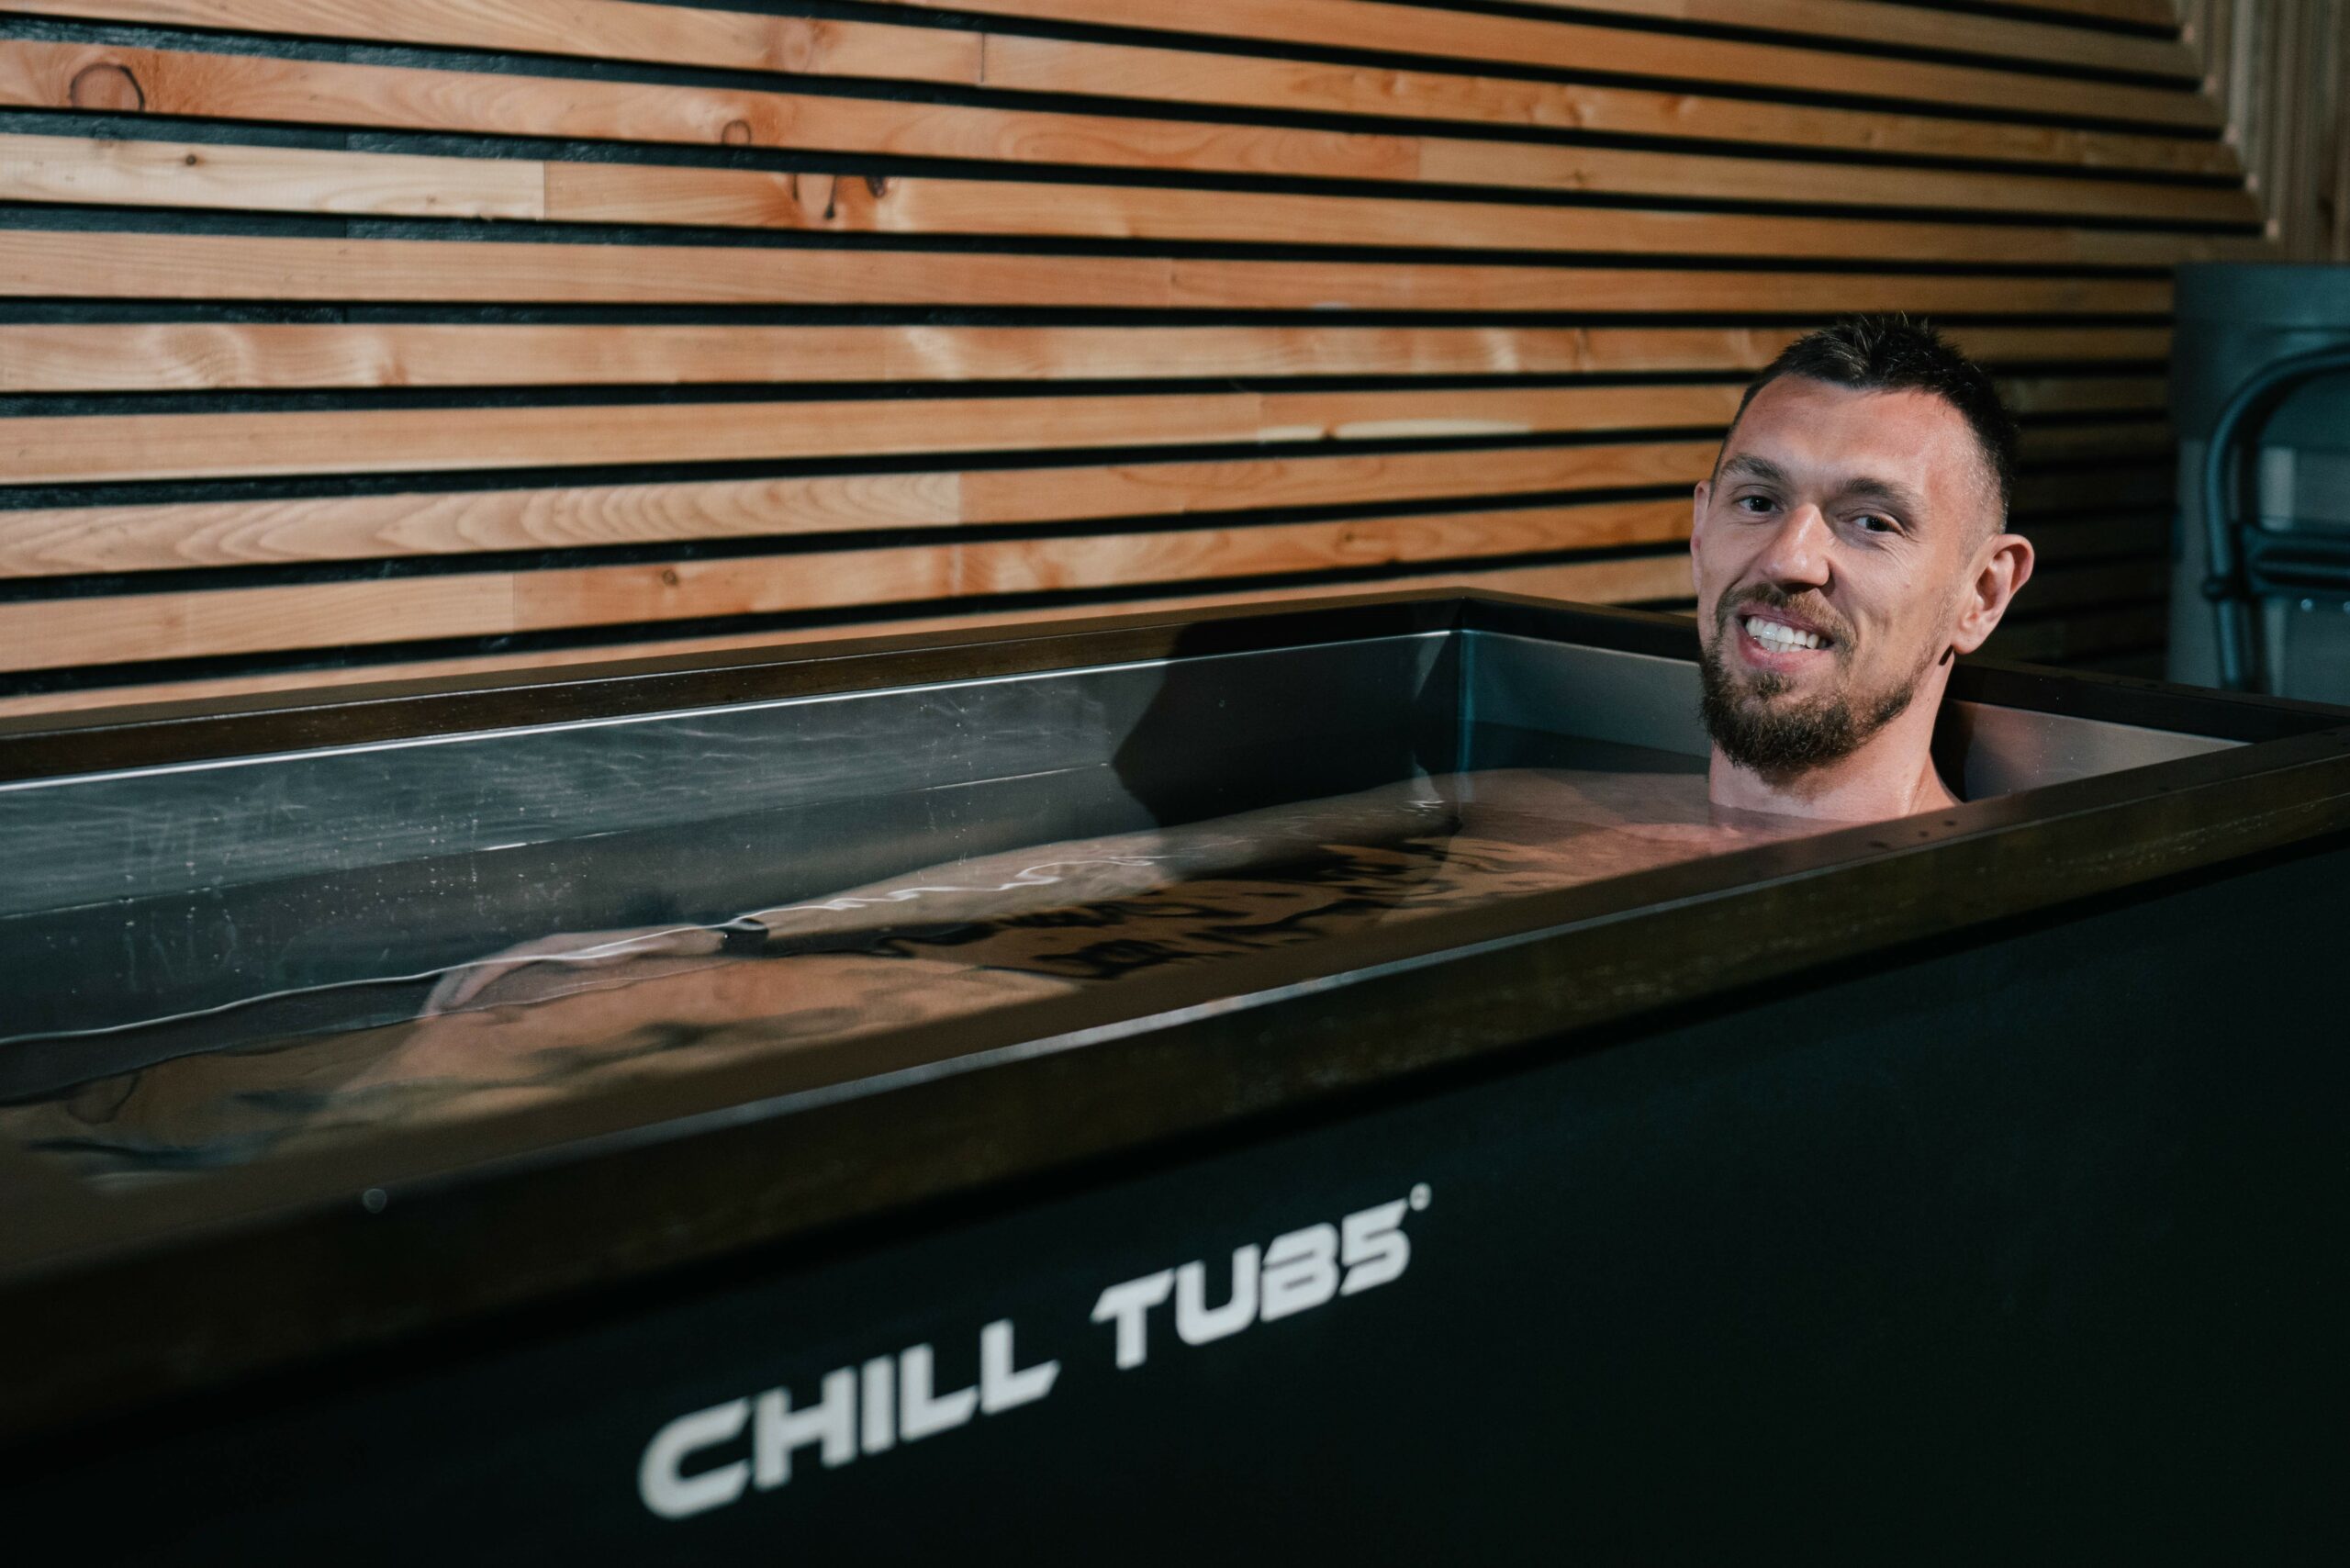 Chill Tubs managing director Rob Carlin sat in a Chill Tubs cold plunge ice bath. He is smiling at the camera.